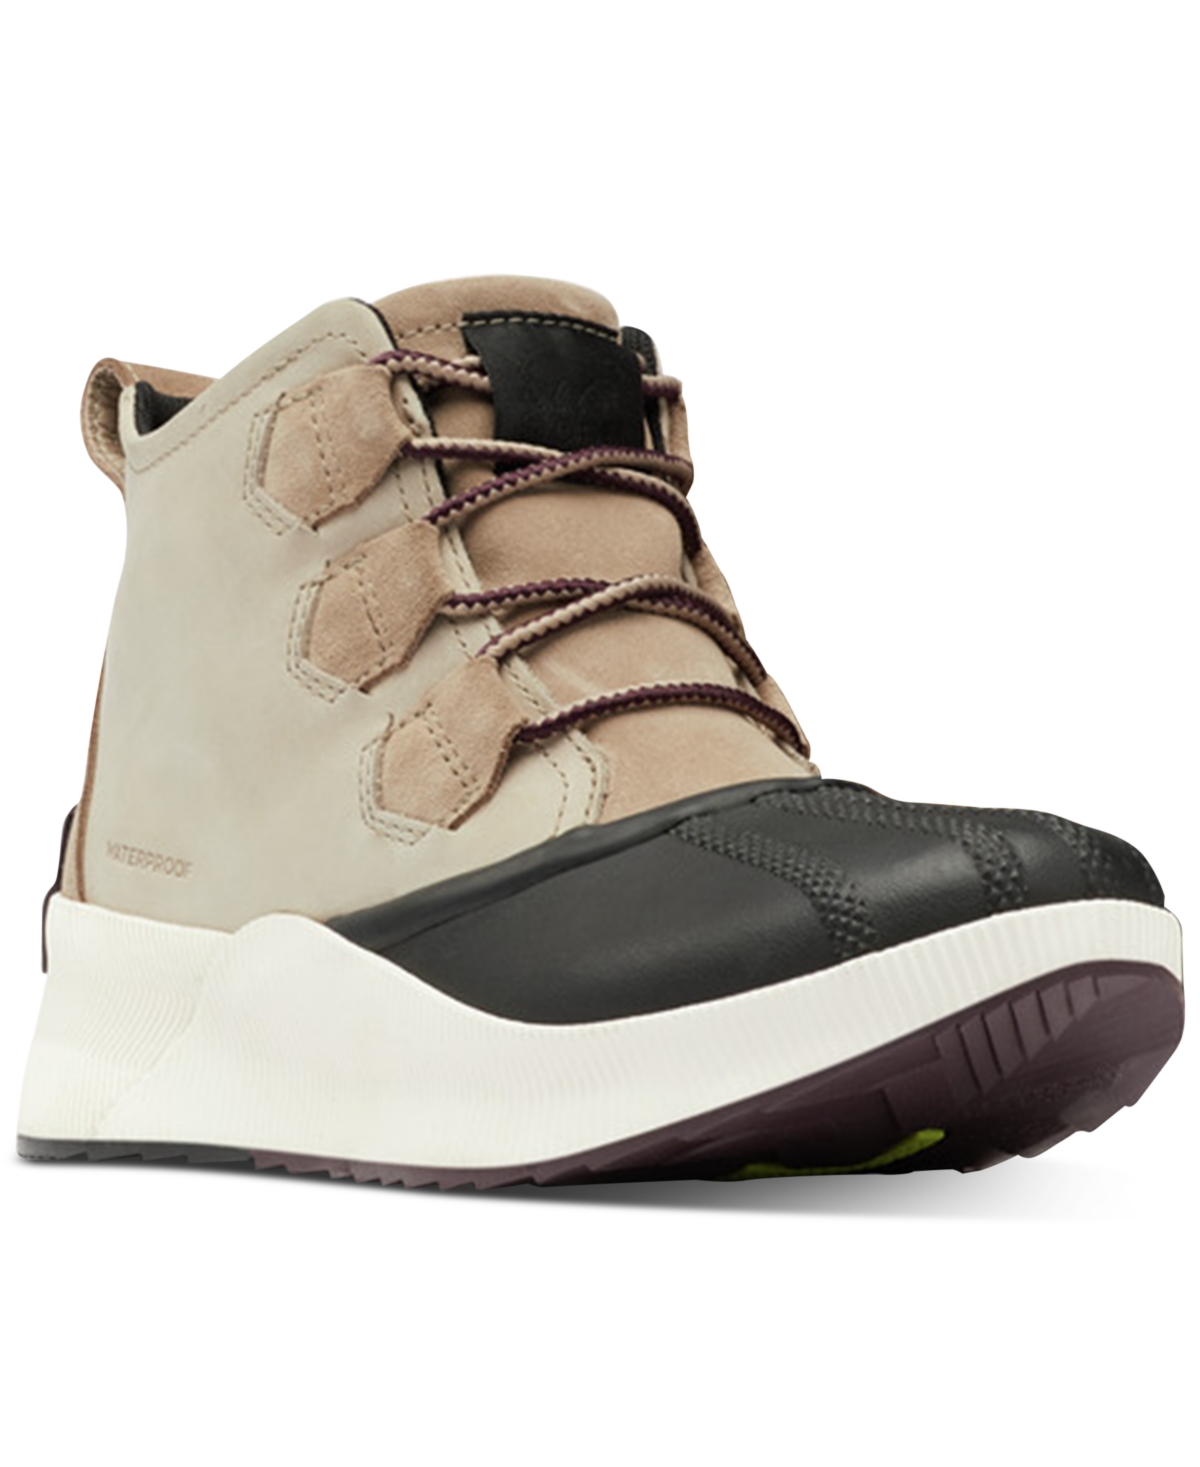 SOREL Out N About III Waterproof Boot in Omega Taupe Bl at Nordstrom, Size 10